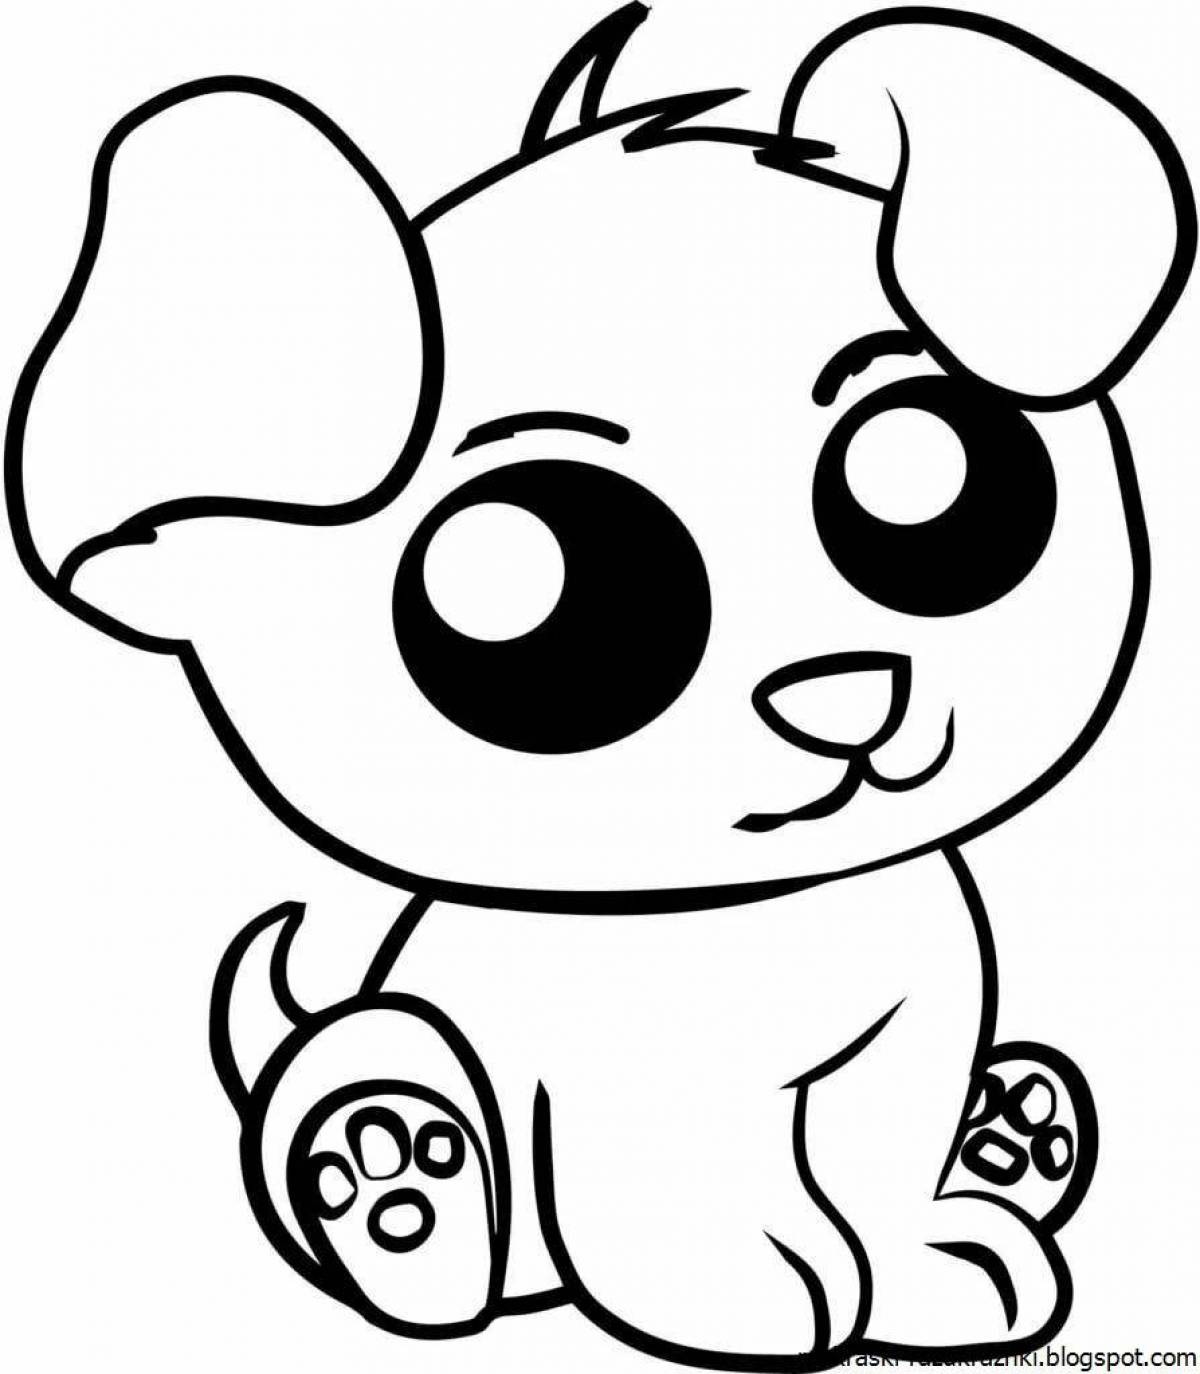 Zippy animal coloring pages cute